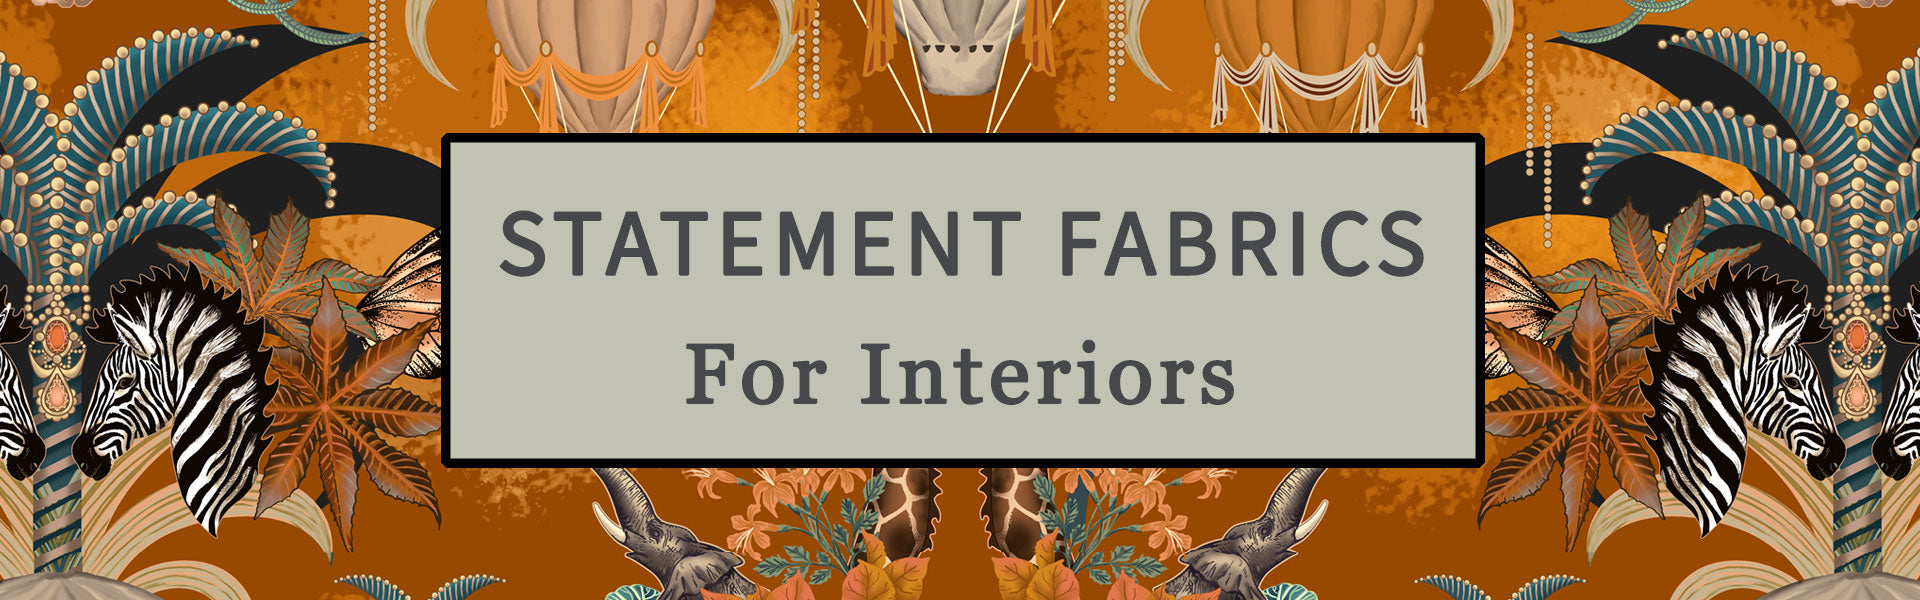 Statement Designer Fabrics for Interiors, Upholstery, Curtains and Soft Furnishings by Becca Who